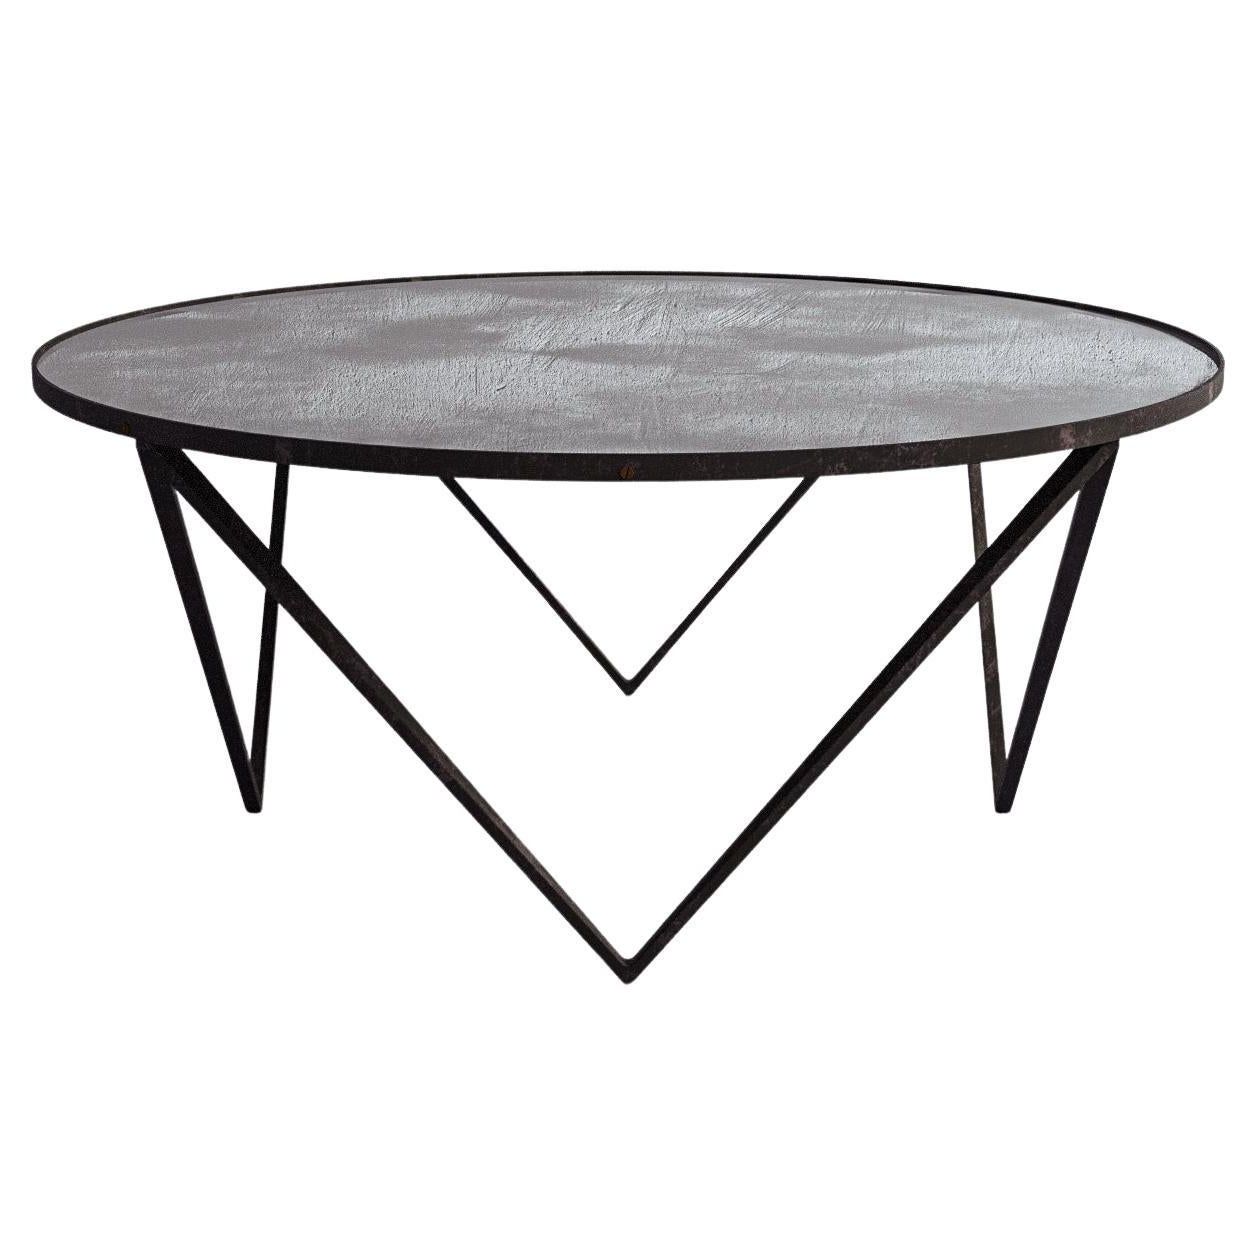 Latest Audin" Architectural, Antique Mirrored Cocktail Tablechristiane Lemieux  For Sale At 1stdibs In Antique Mirrored Outdoor Tables (View 1 of 15)